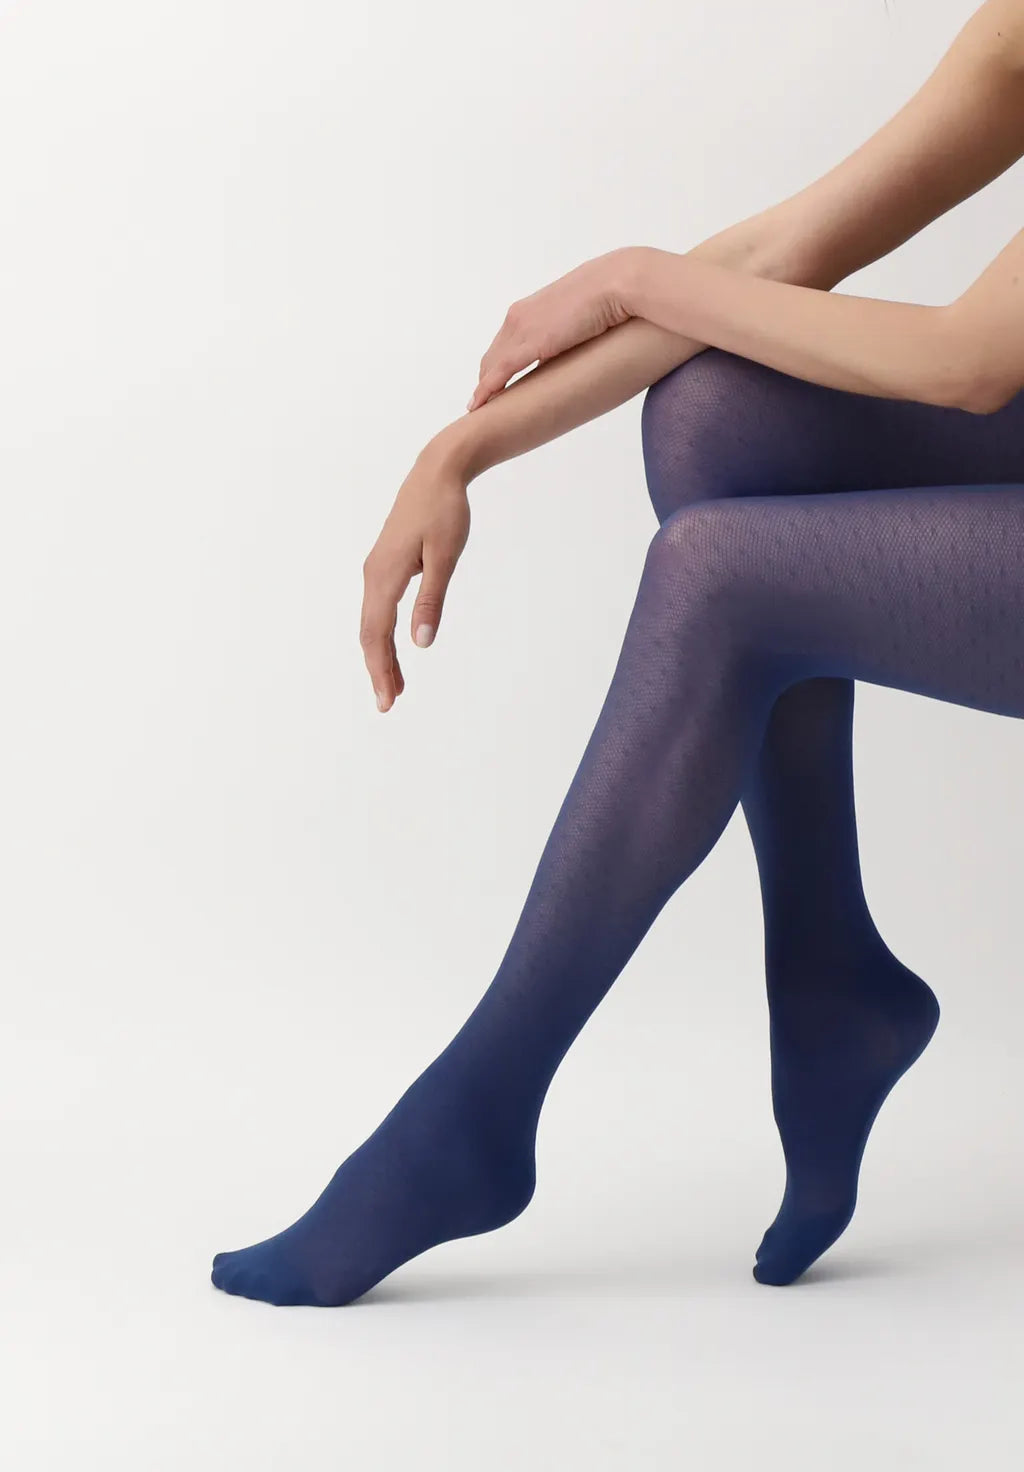 OroblÌ_ Eco Sneaker Tights - Dark Blue (marine) micro mesh recycled tights with a polka dot spot pattern